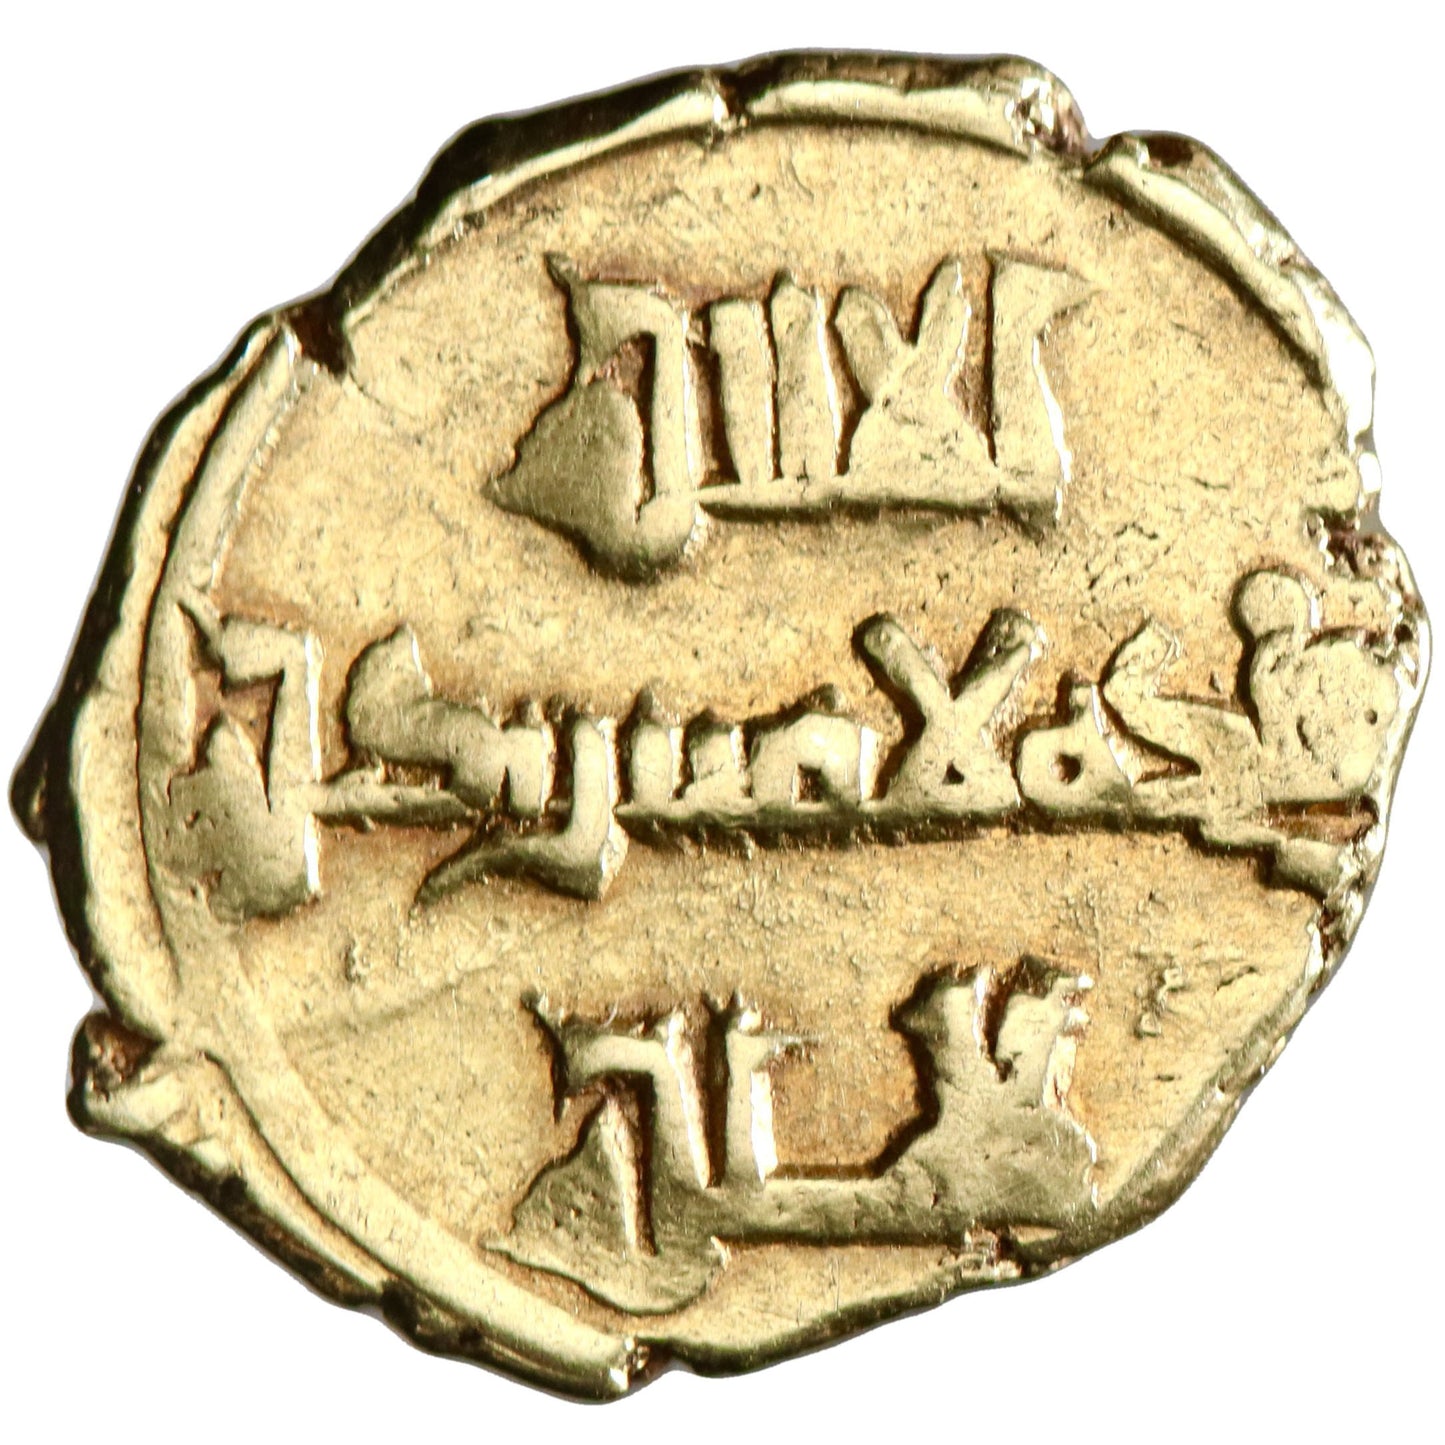 Sicily, Roger II, gold multiple tari, 1130-1154 CE, arabic legends, "by the order of Roger the Second"